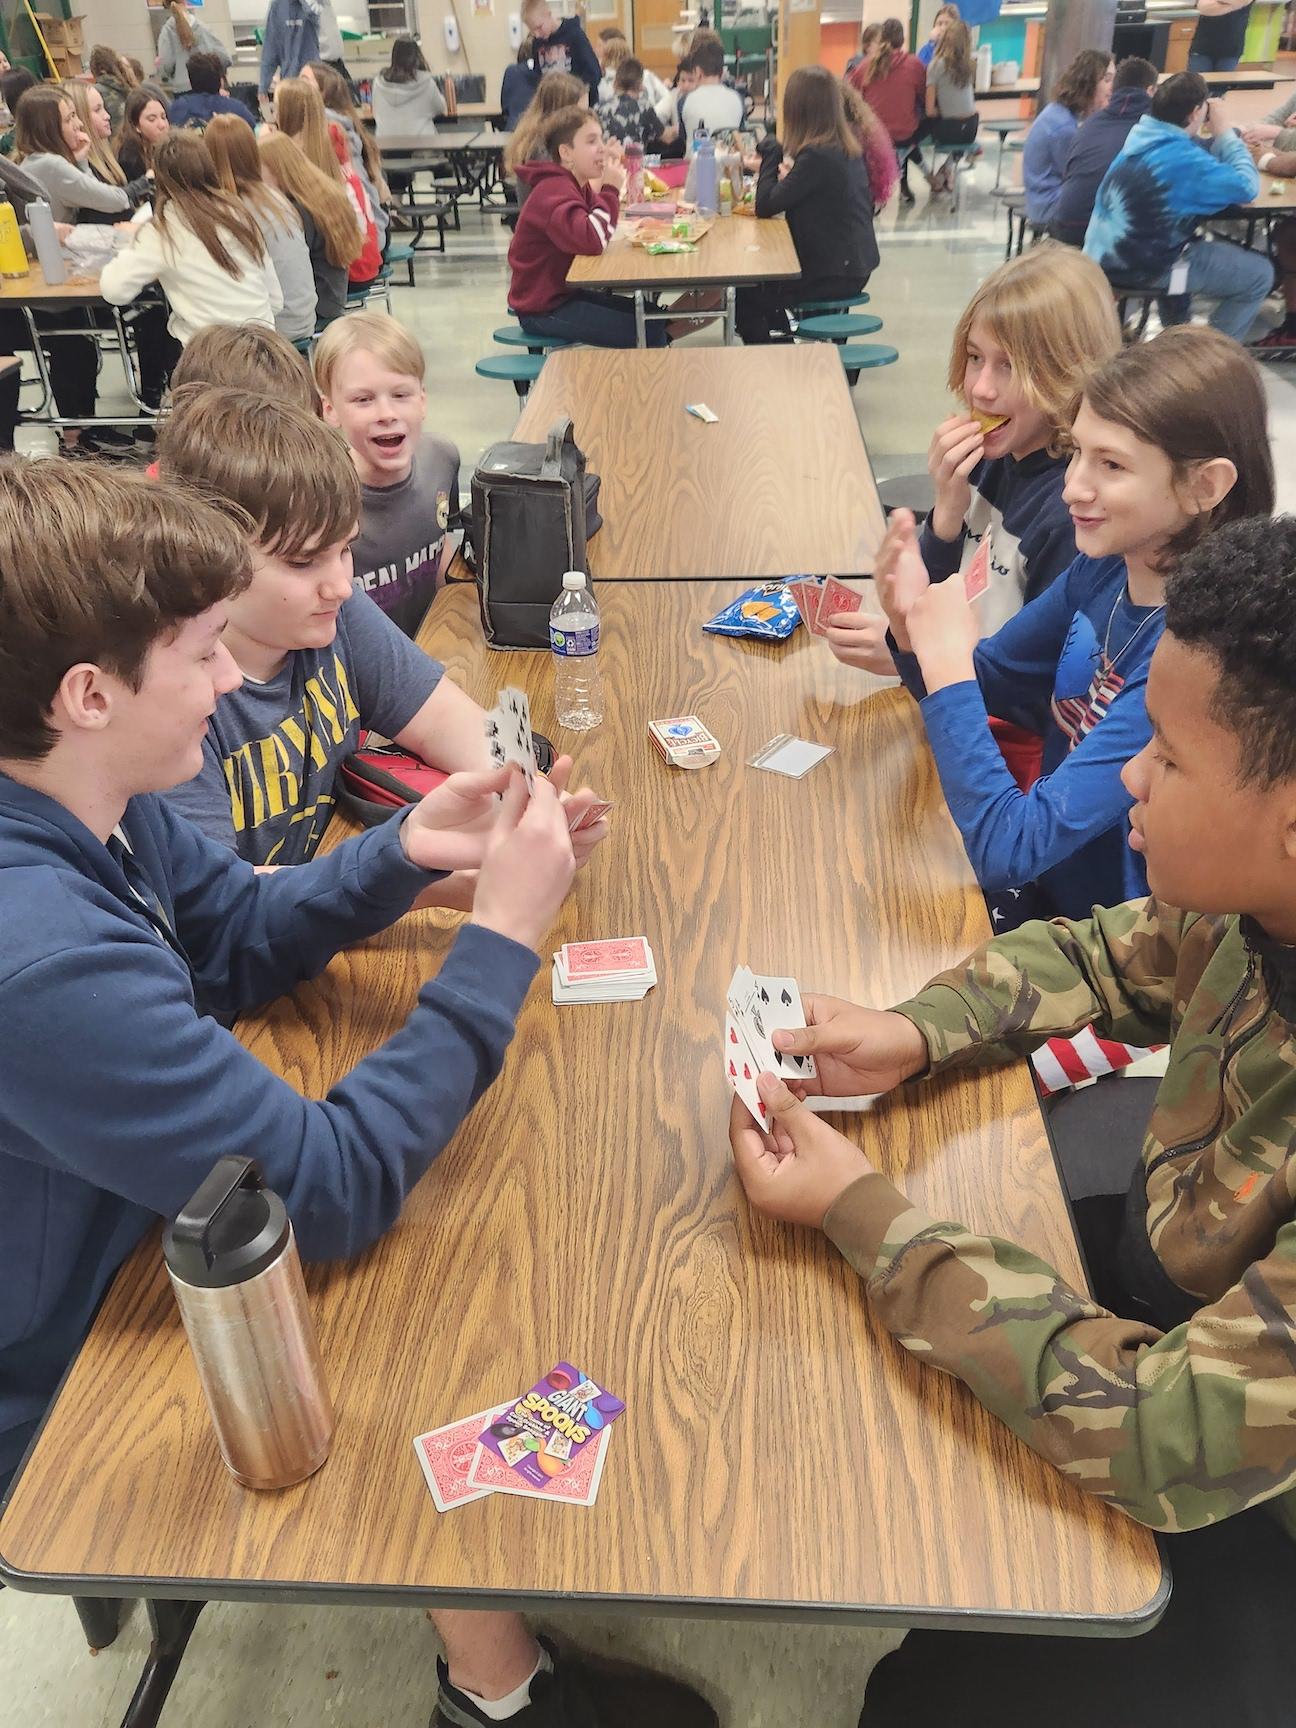 These 7th-graders enjoy game time